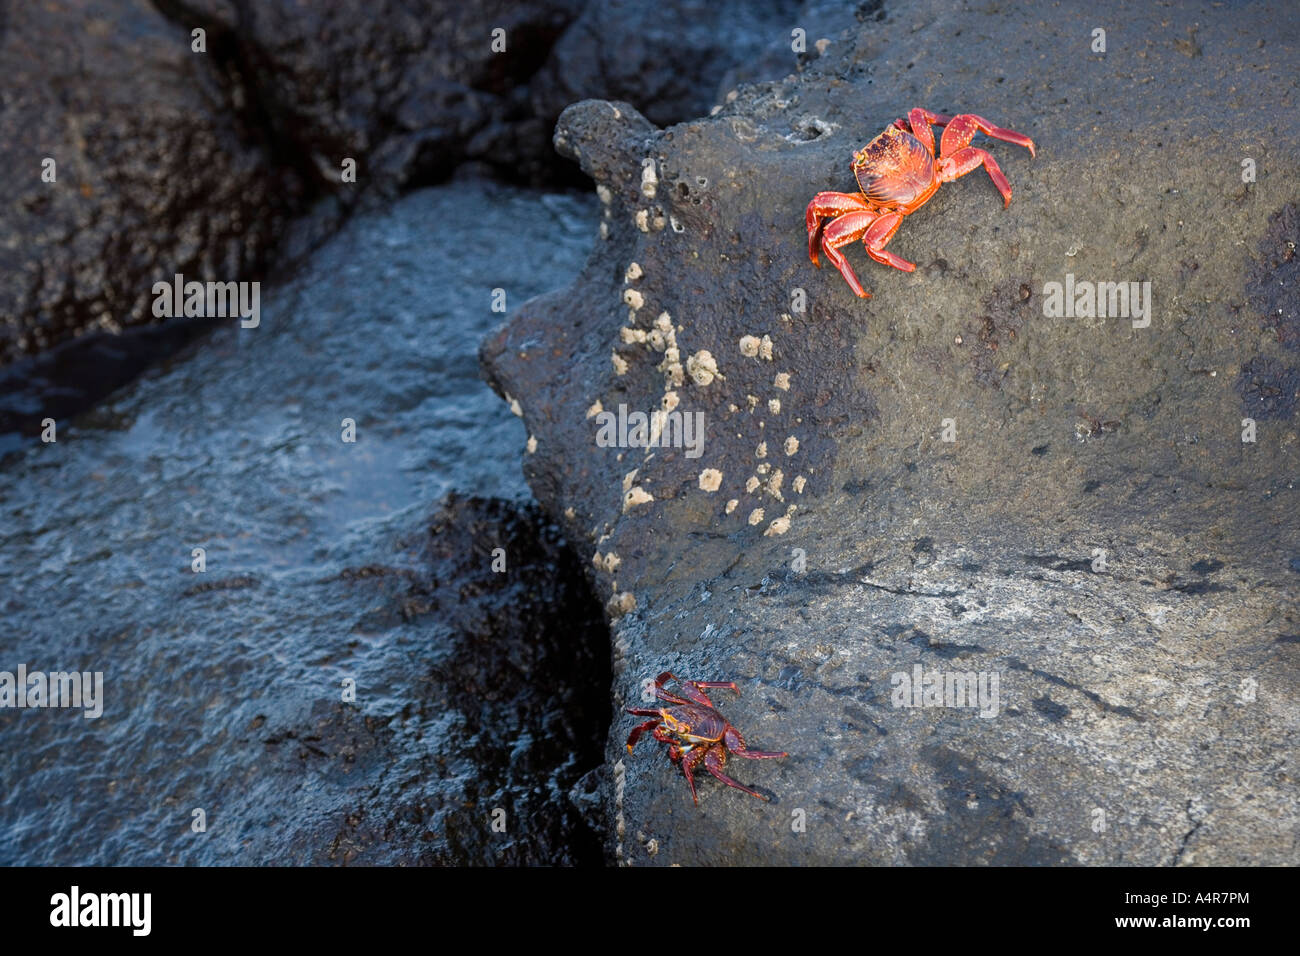 Two Sally Lightfoot crabs Grapsus grapsus on the South Plaza Island in the Galapagos Archipelago Pacific Ocean Ecuador Stock Photo